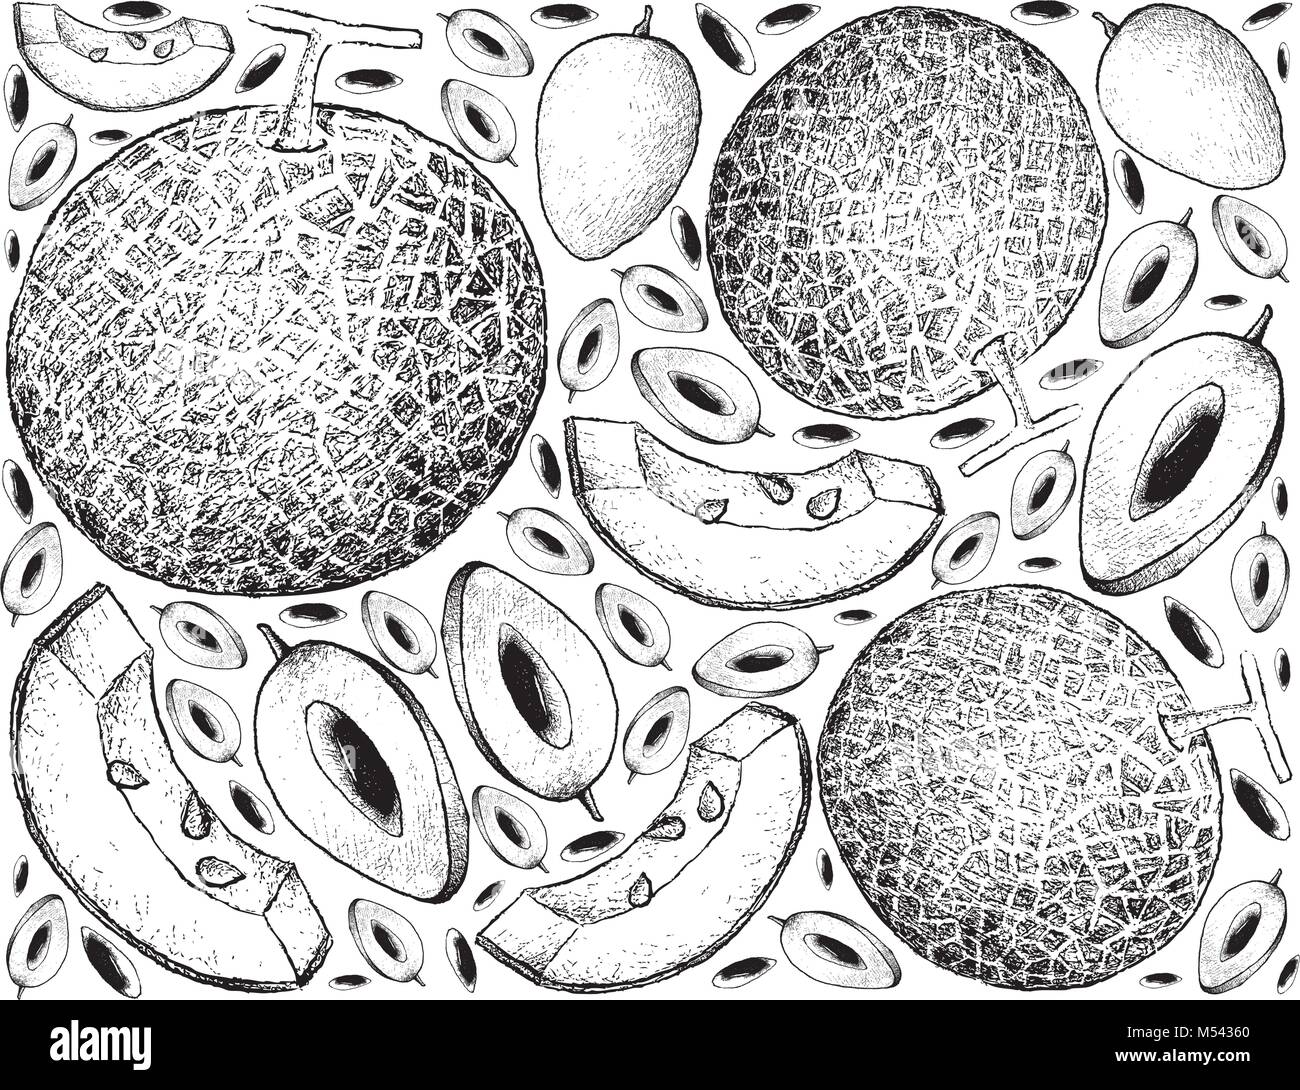 Fruit, Illustration Wallpaper Background of Hand Drawn Sketch of Melon and Sapodilla Plum Fruits. Stock Vector